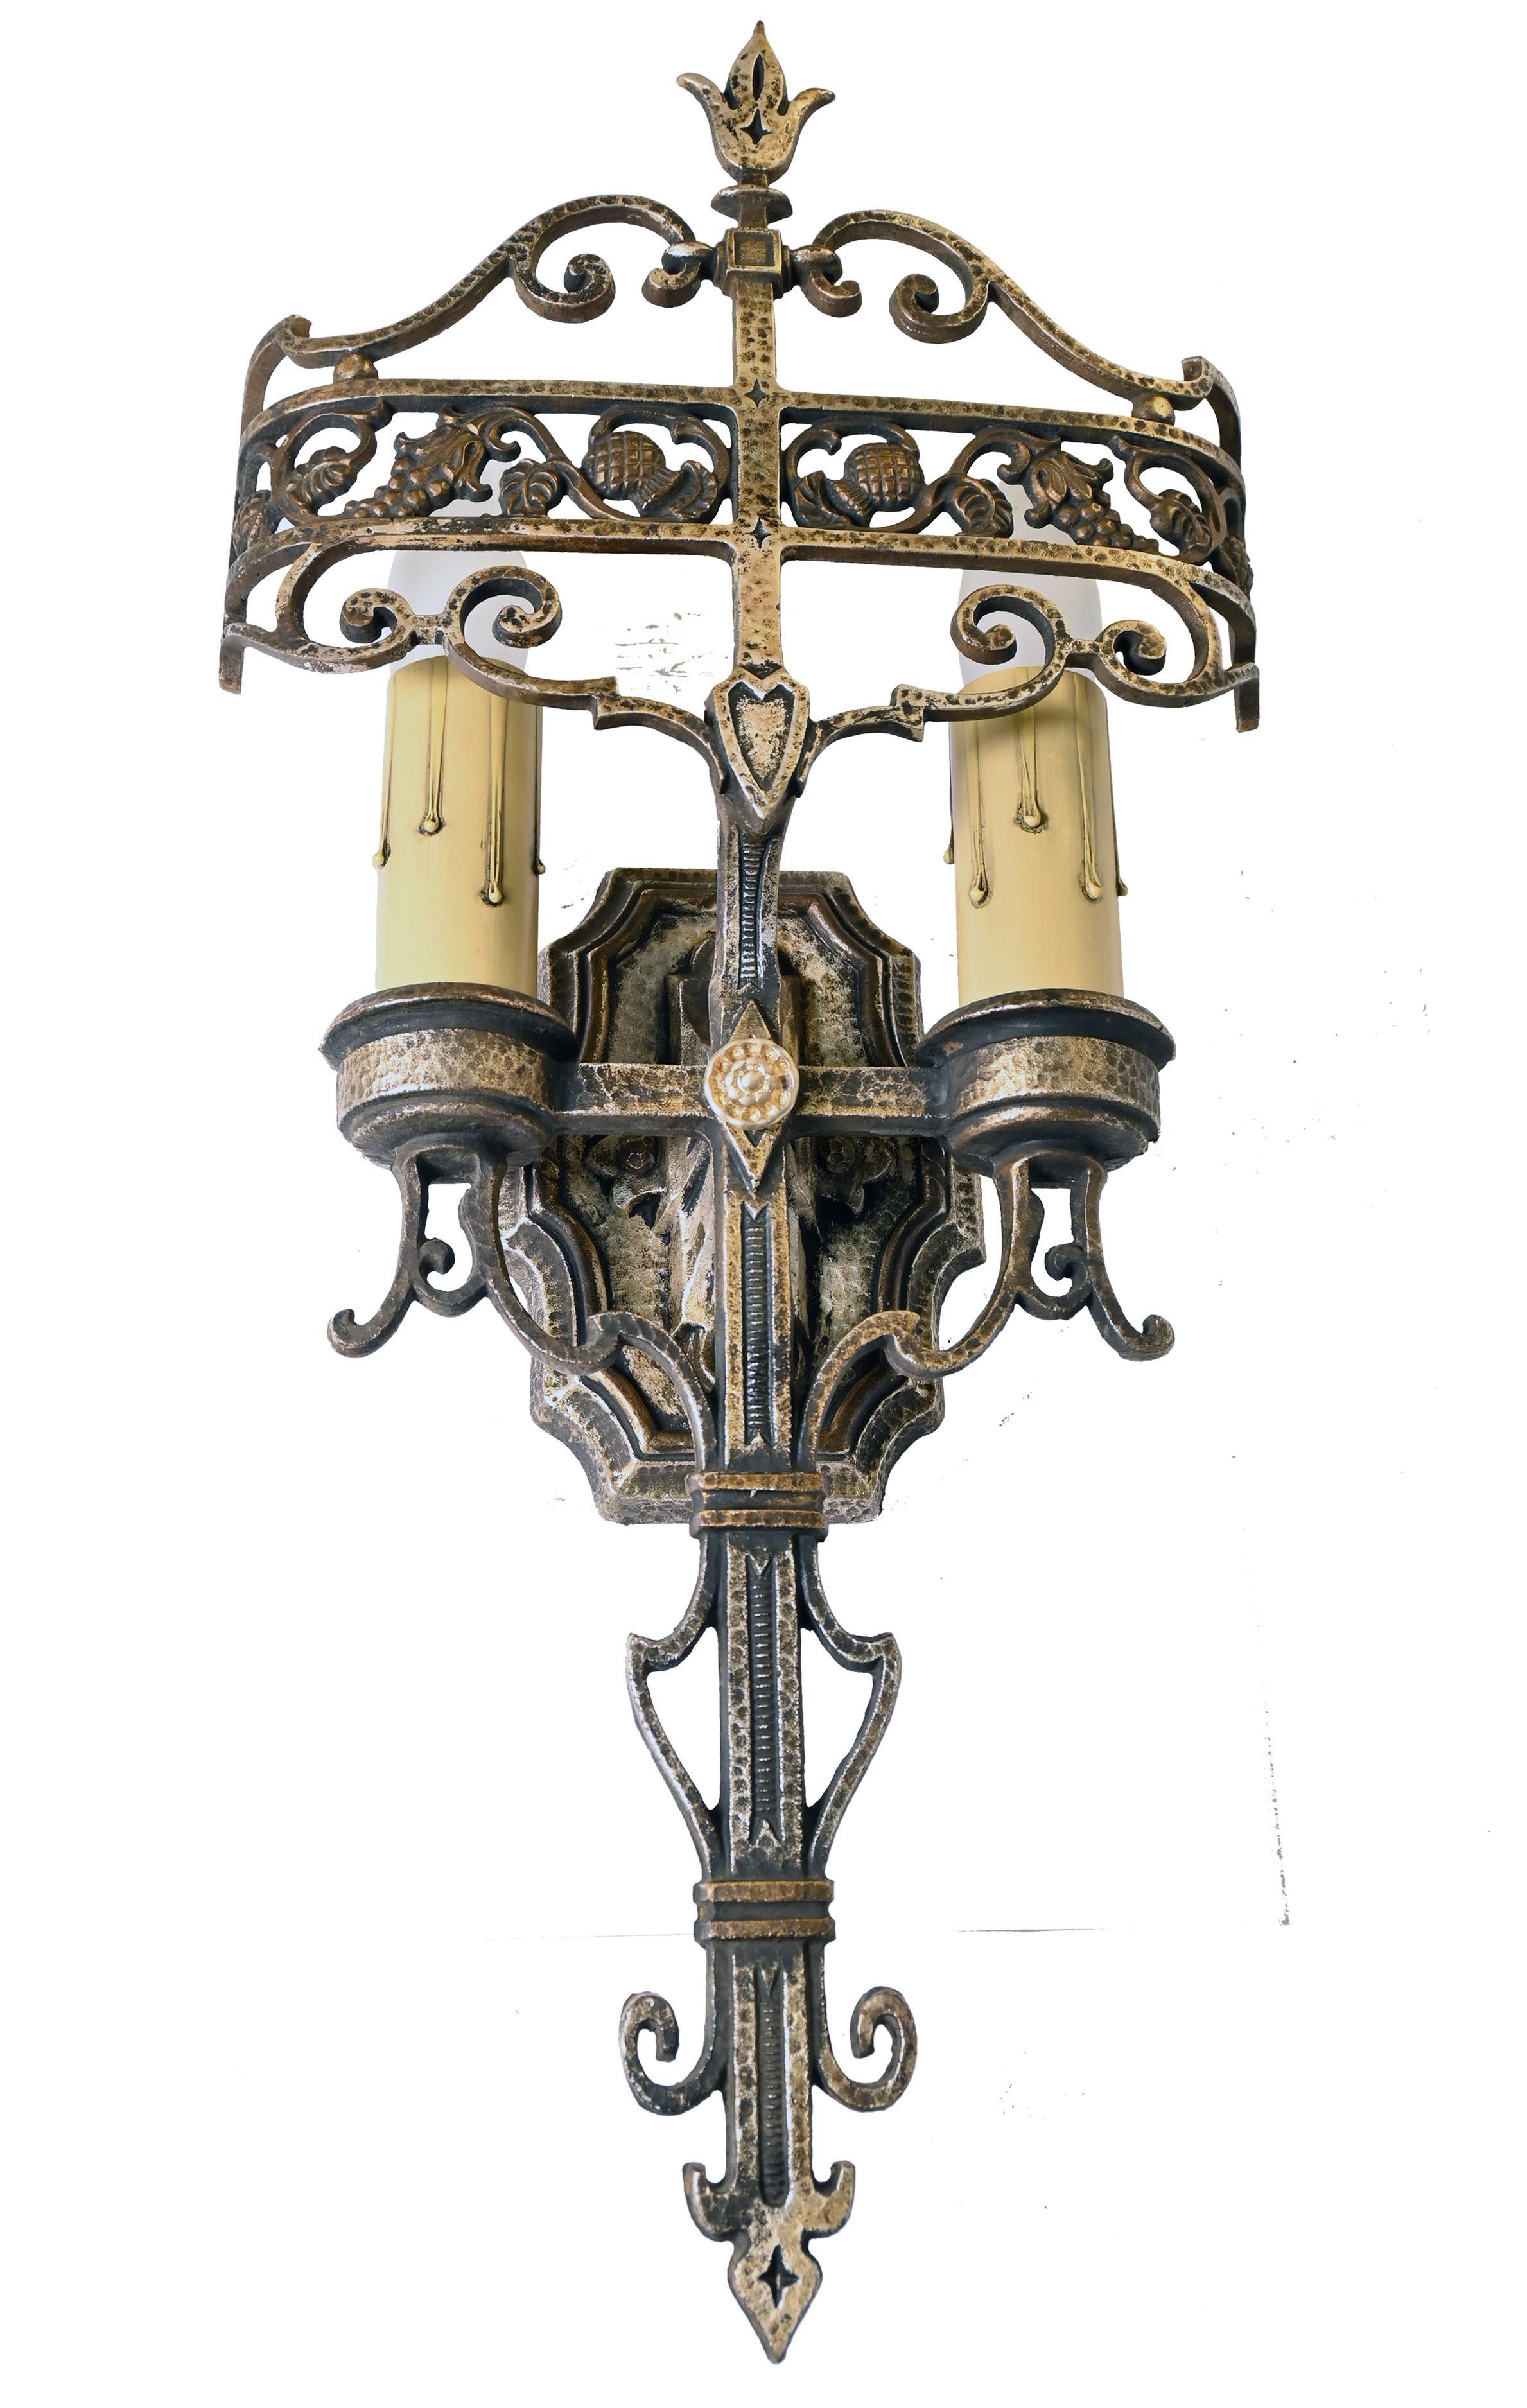 5 Available / sold individually 

AA# 60176
Circa: 1929
Condition: Age Consistent
Material: cast bronze 
Finish: original gold & pewter wash
Country of origin: USA
Illumination: 2 medium sockets
Dimensions: 19” height x 9” wide x 3 1/4”